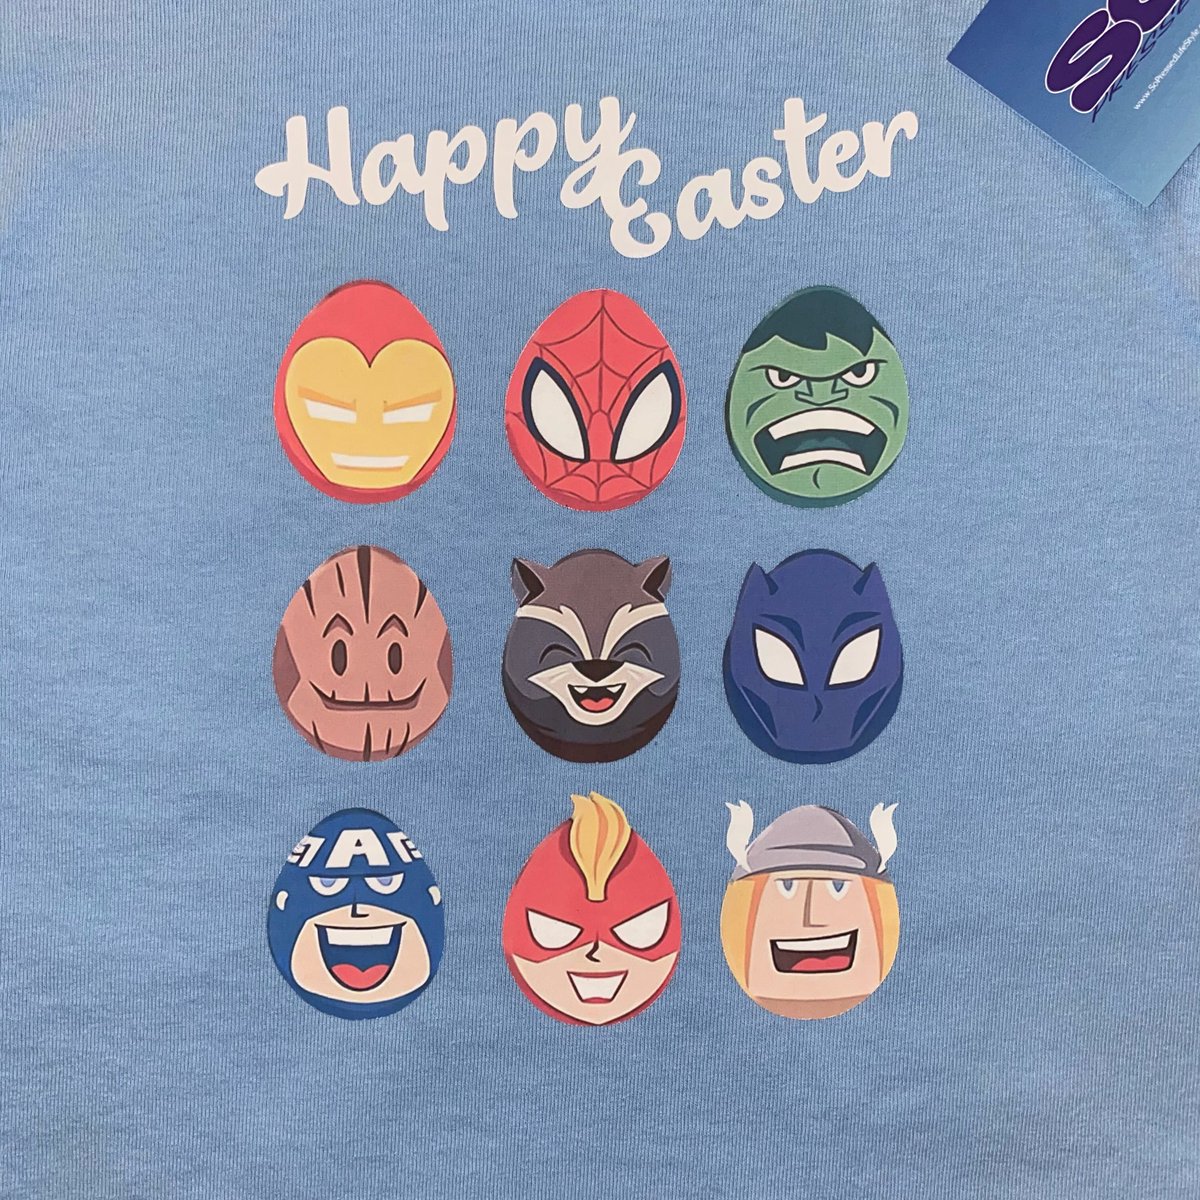 Shop at So Pressed for all of your holiday gear🐣 😍 #happyeaster #happeaster🐰 #marvel #eastershirt #littlekids #customizeeaster #supportsmallbusiness #blackbuisness #supportblackownedbusinesses  #customizedapparel #supportblackbusiness #sopressed